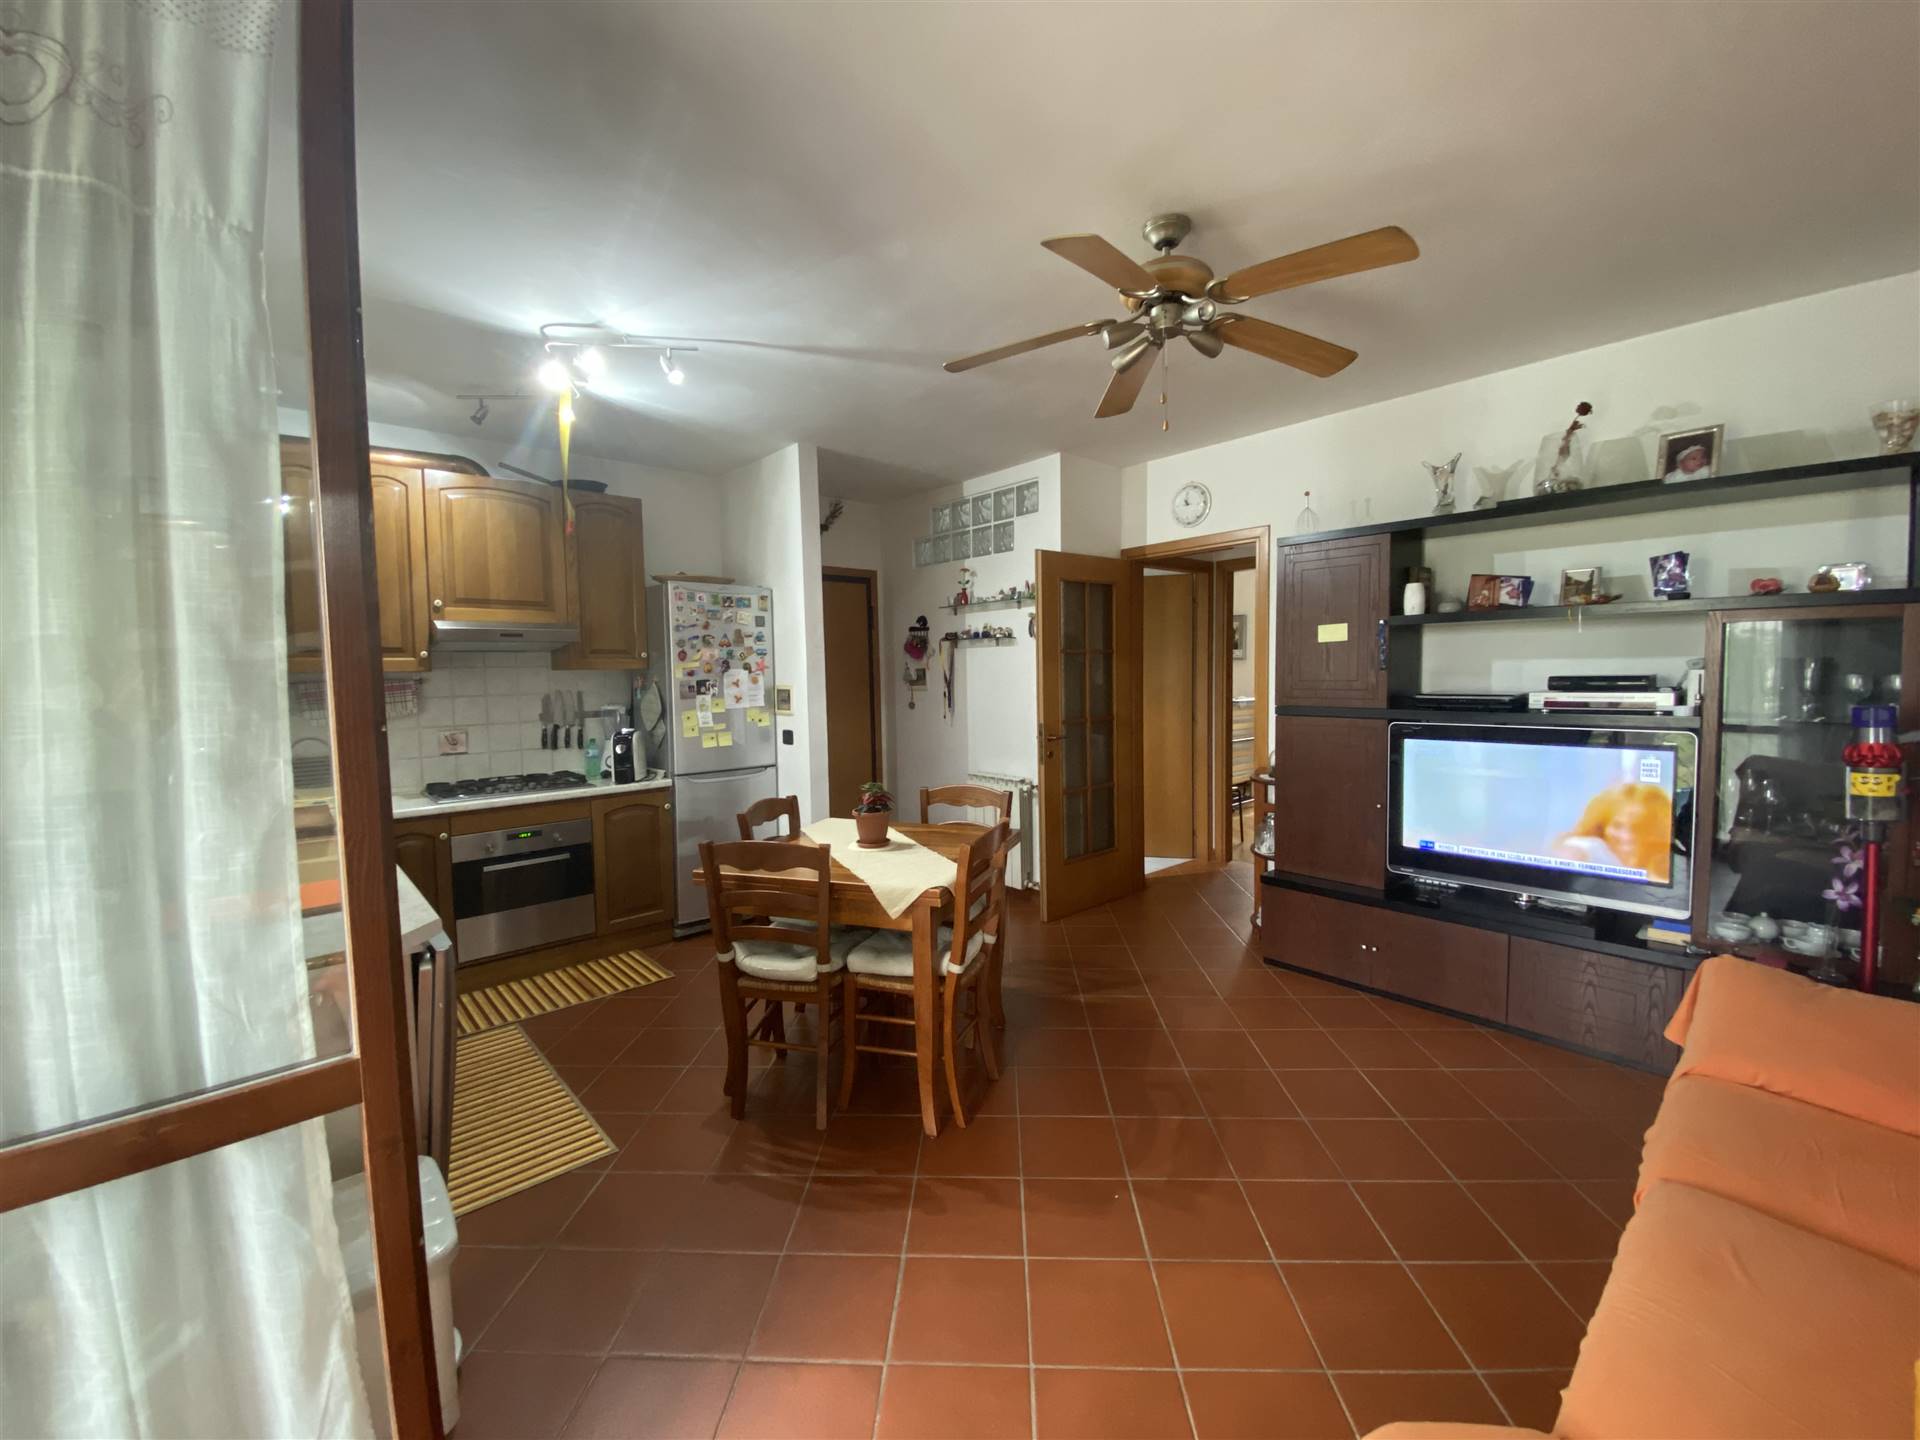 INNO, LASTRA A SIGNA, Apartment for sale of 60 Sq. mt., Excellent Condition, Heating Individual heating system, Energetic class: G, placed at 2°, 